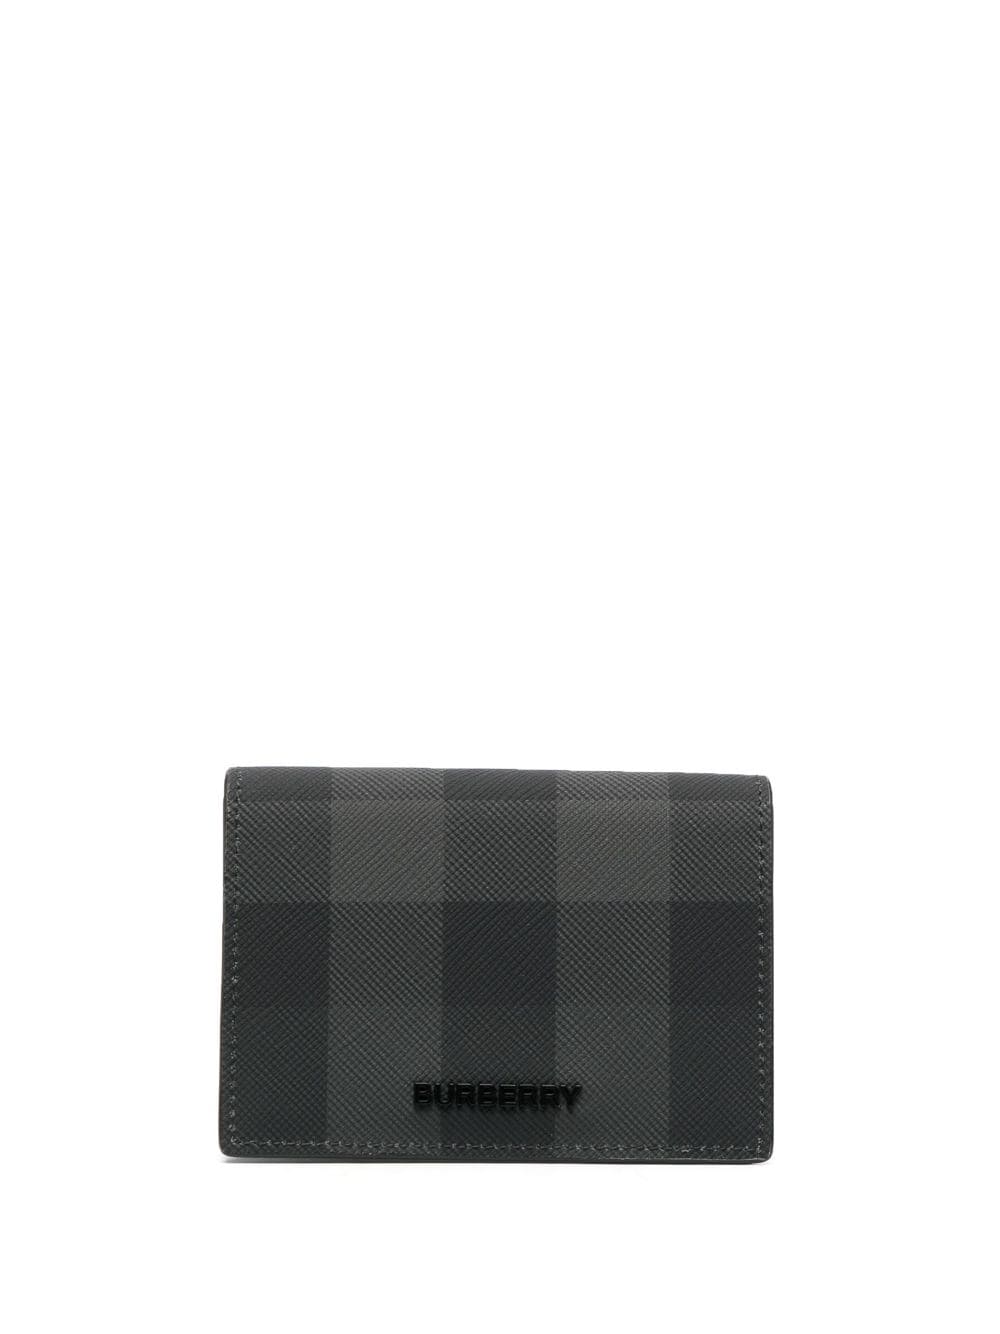 Burberry logo-lettering checked wallet - Grey von Burberry